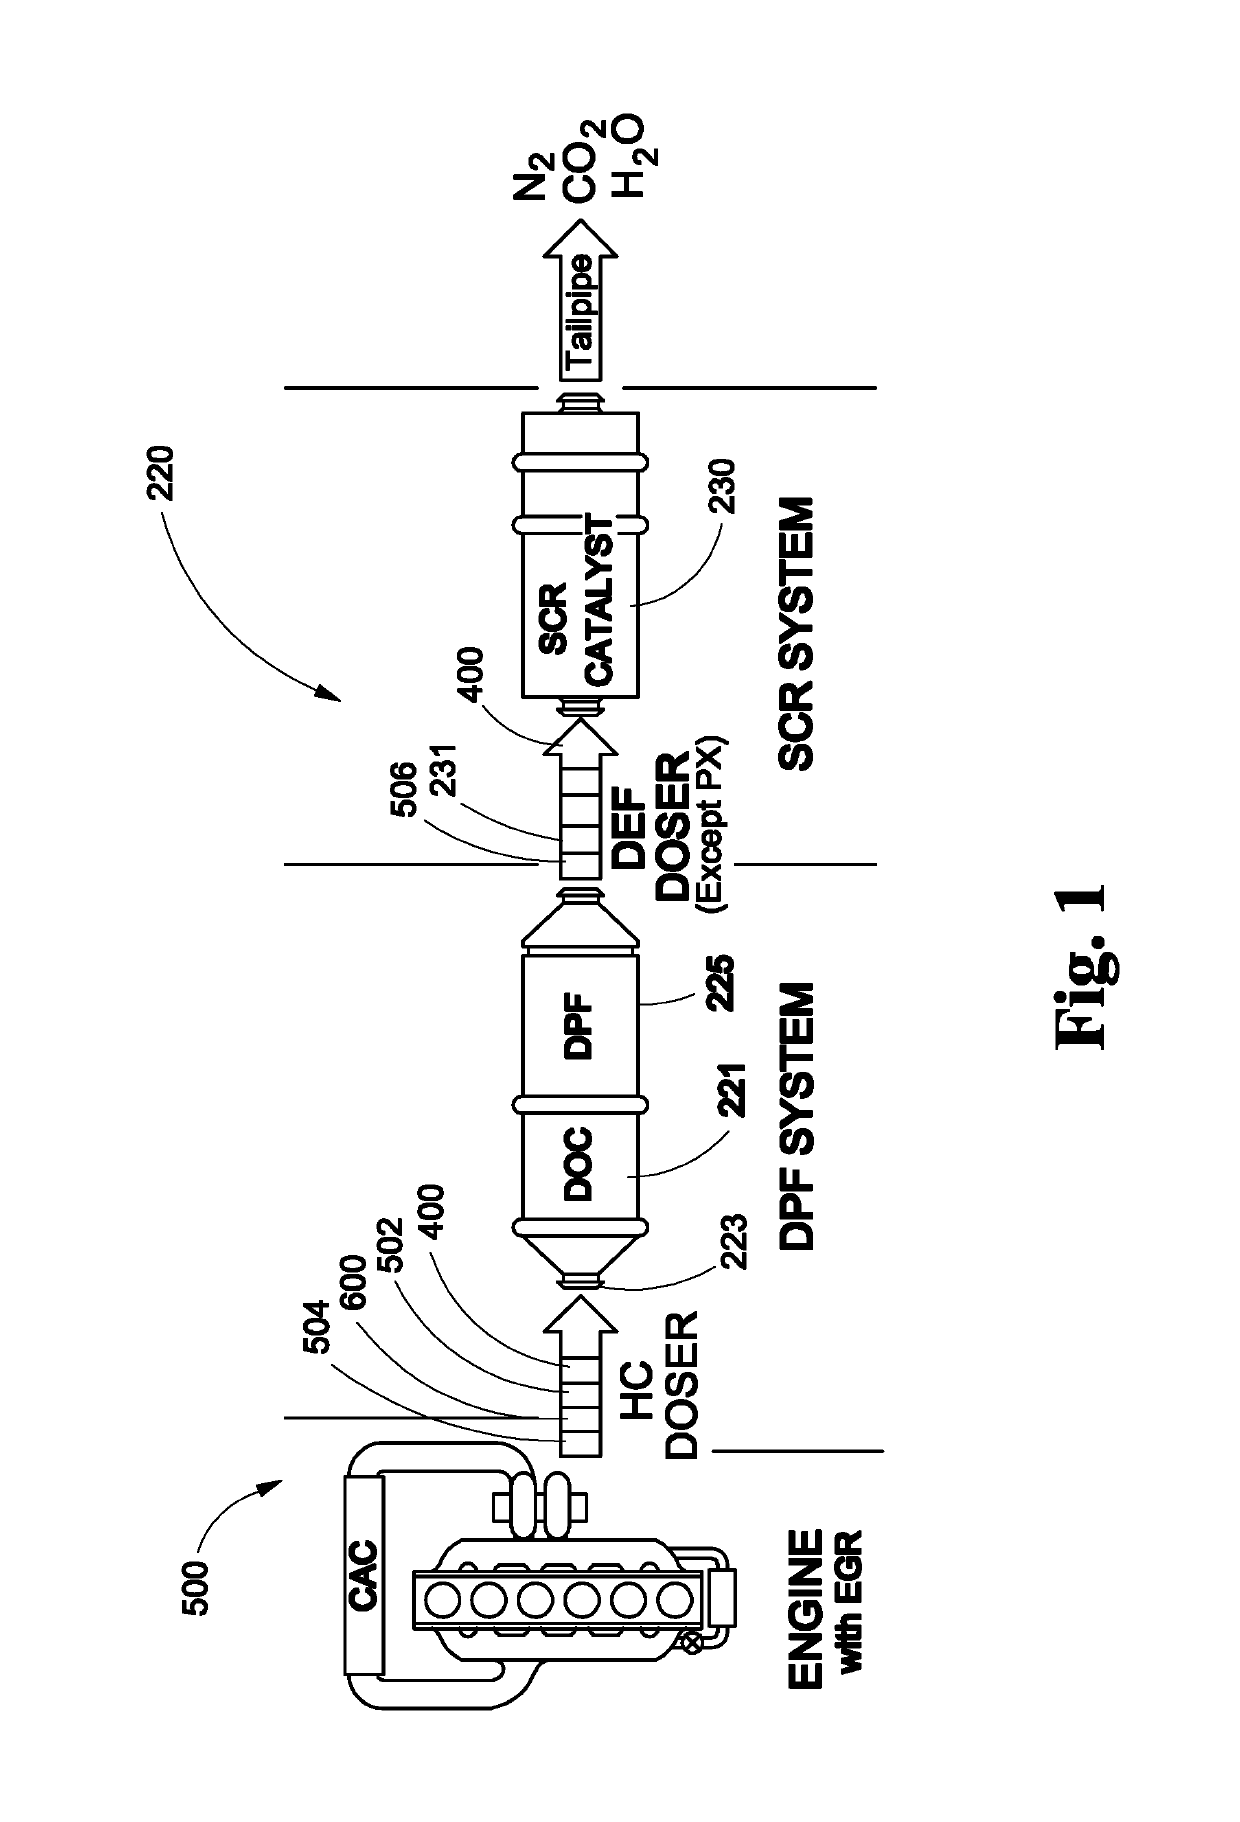 System comprising duel-fuel and after treatment for heavy-heavy duty diesel (HHDD) engines